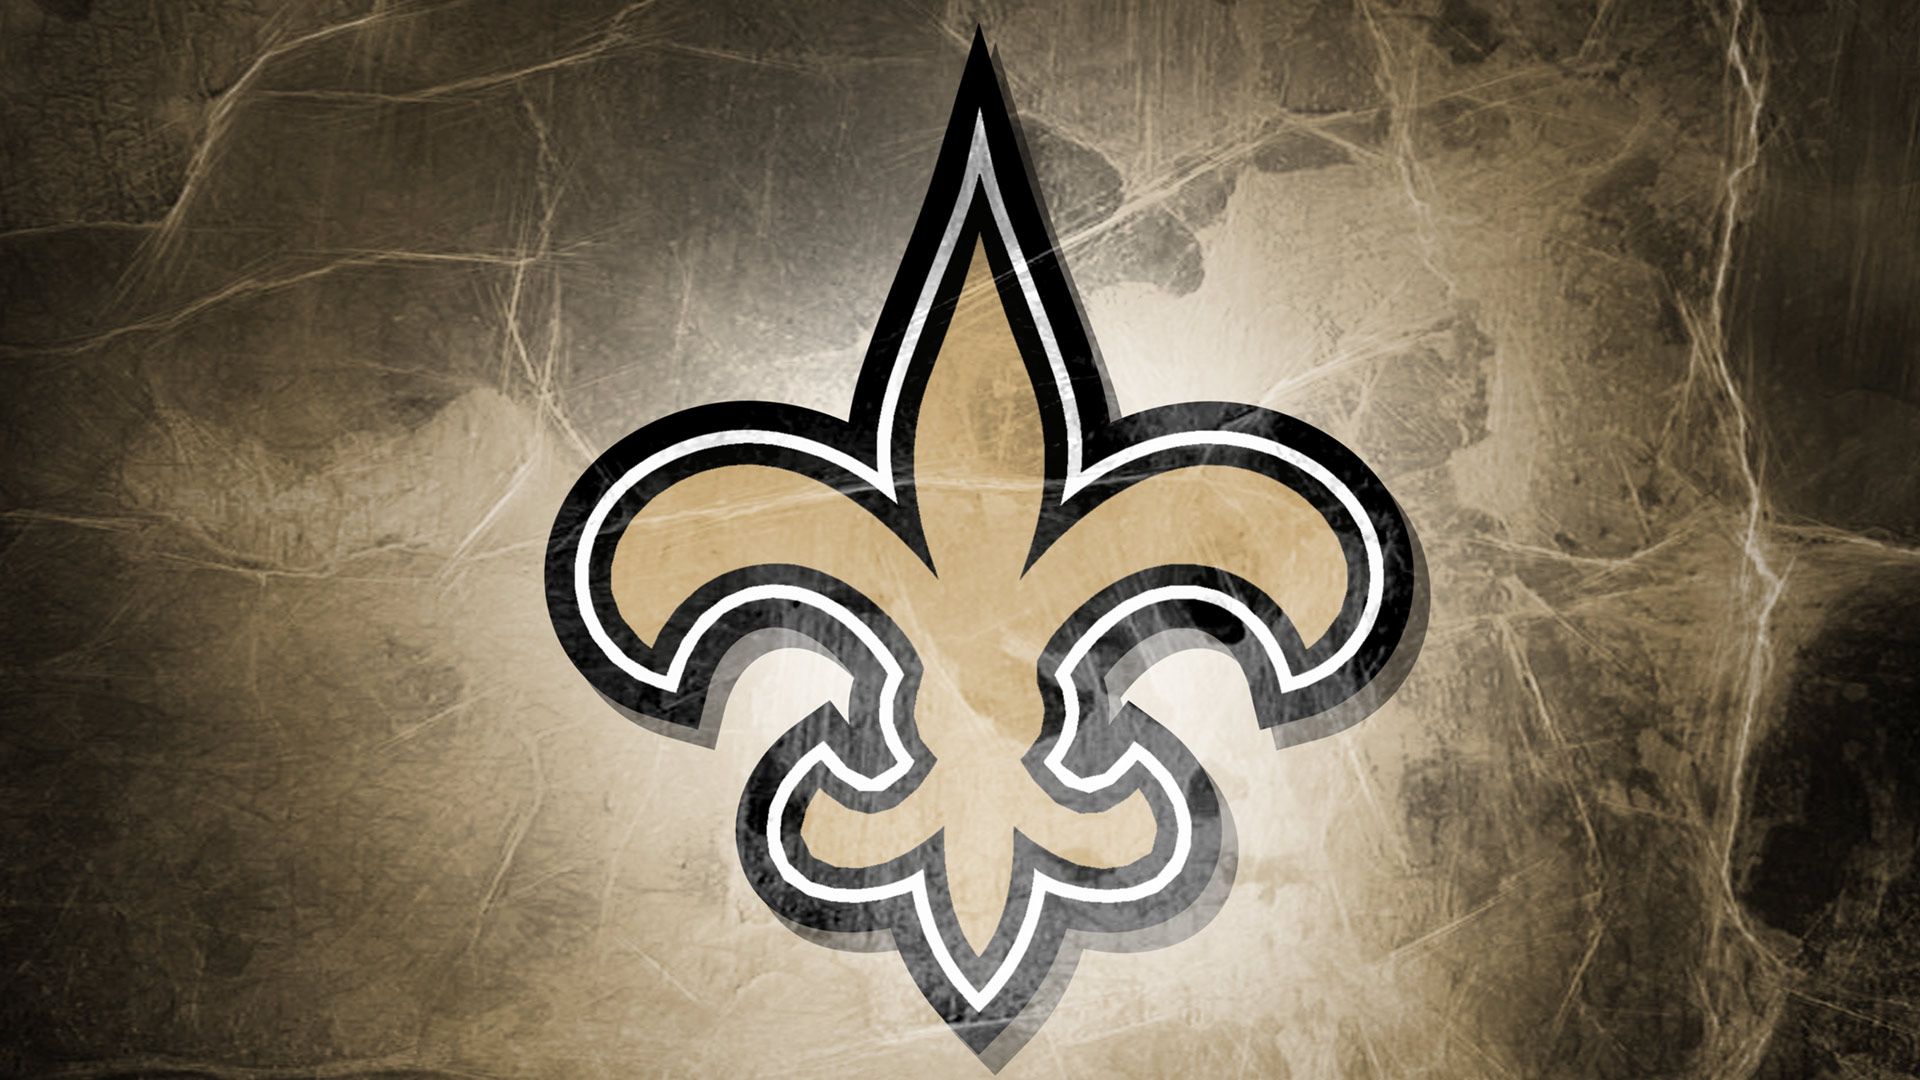 New Orleans Saints wallpaper – Free full hd wallpapers for 1080p ...